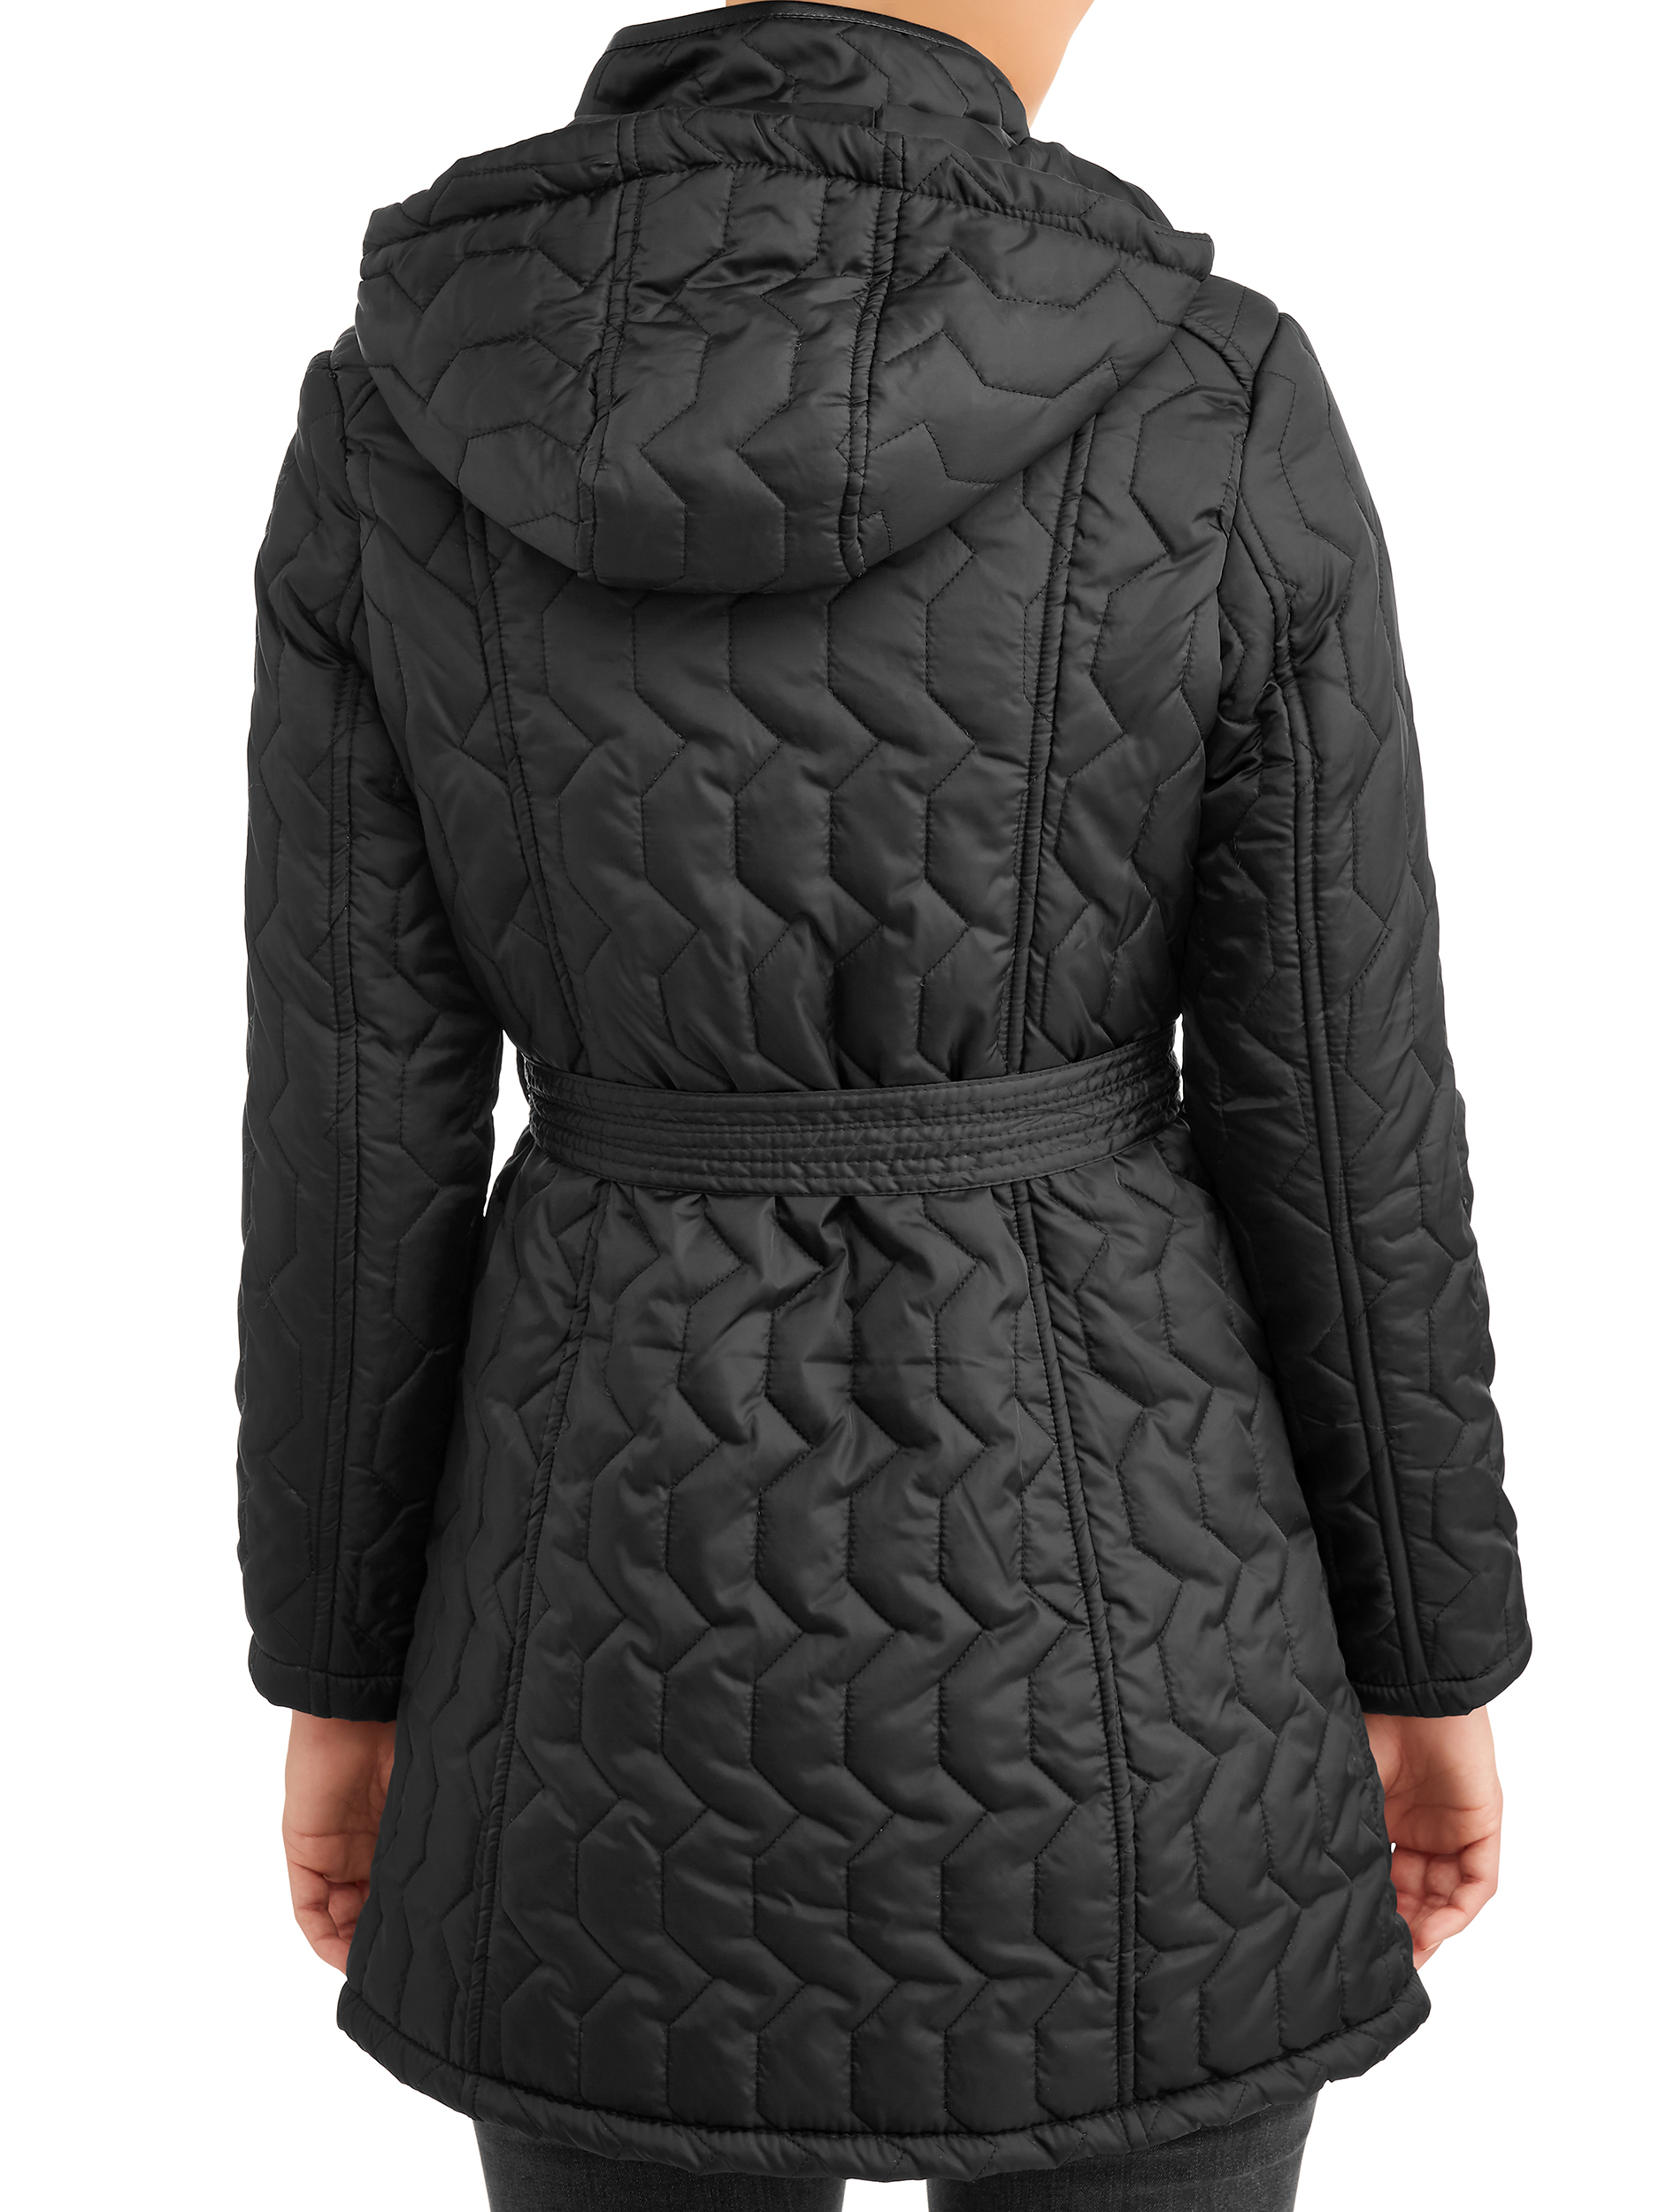 Big Chill Women's Belted Zig-Zag Quilt Jacket - image 3 of 4